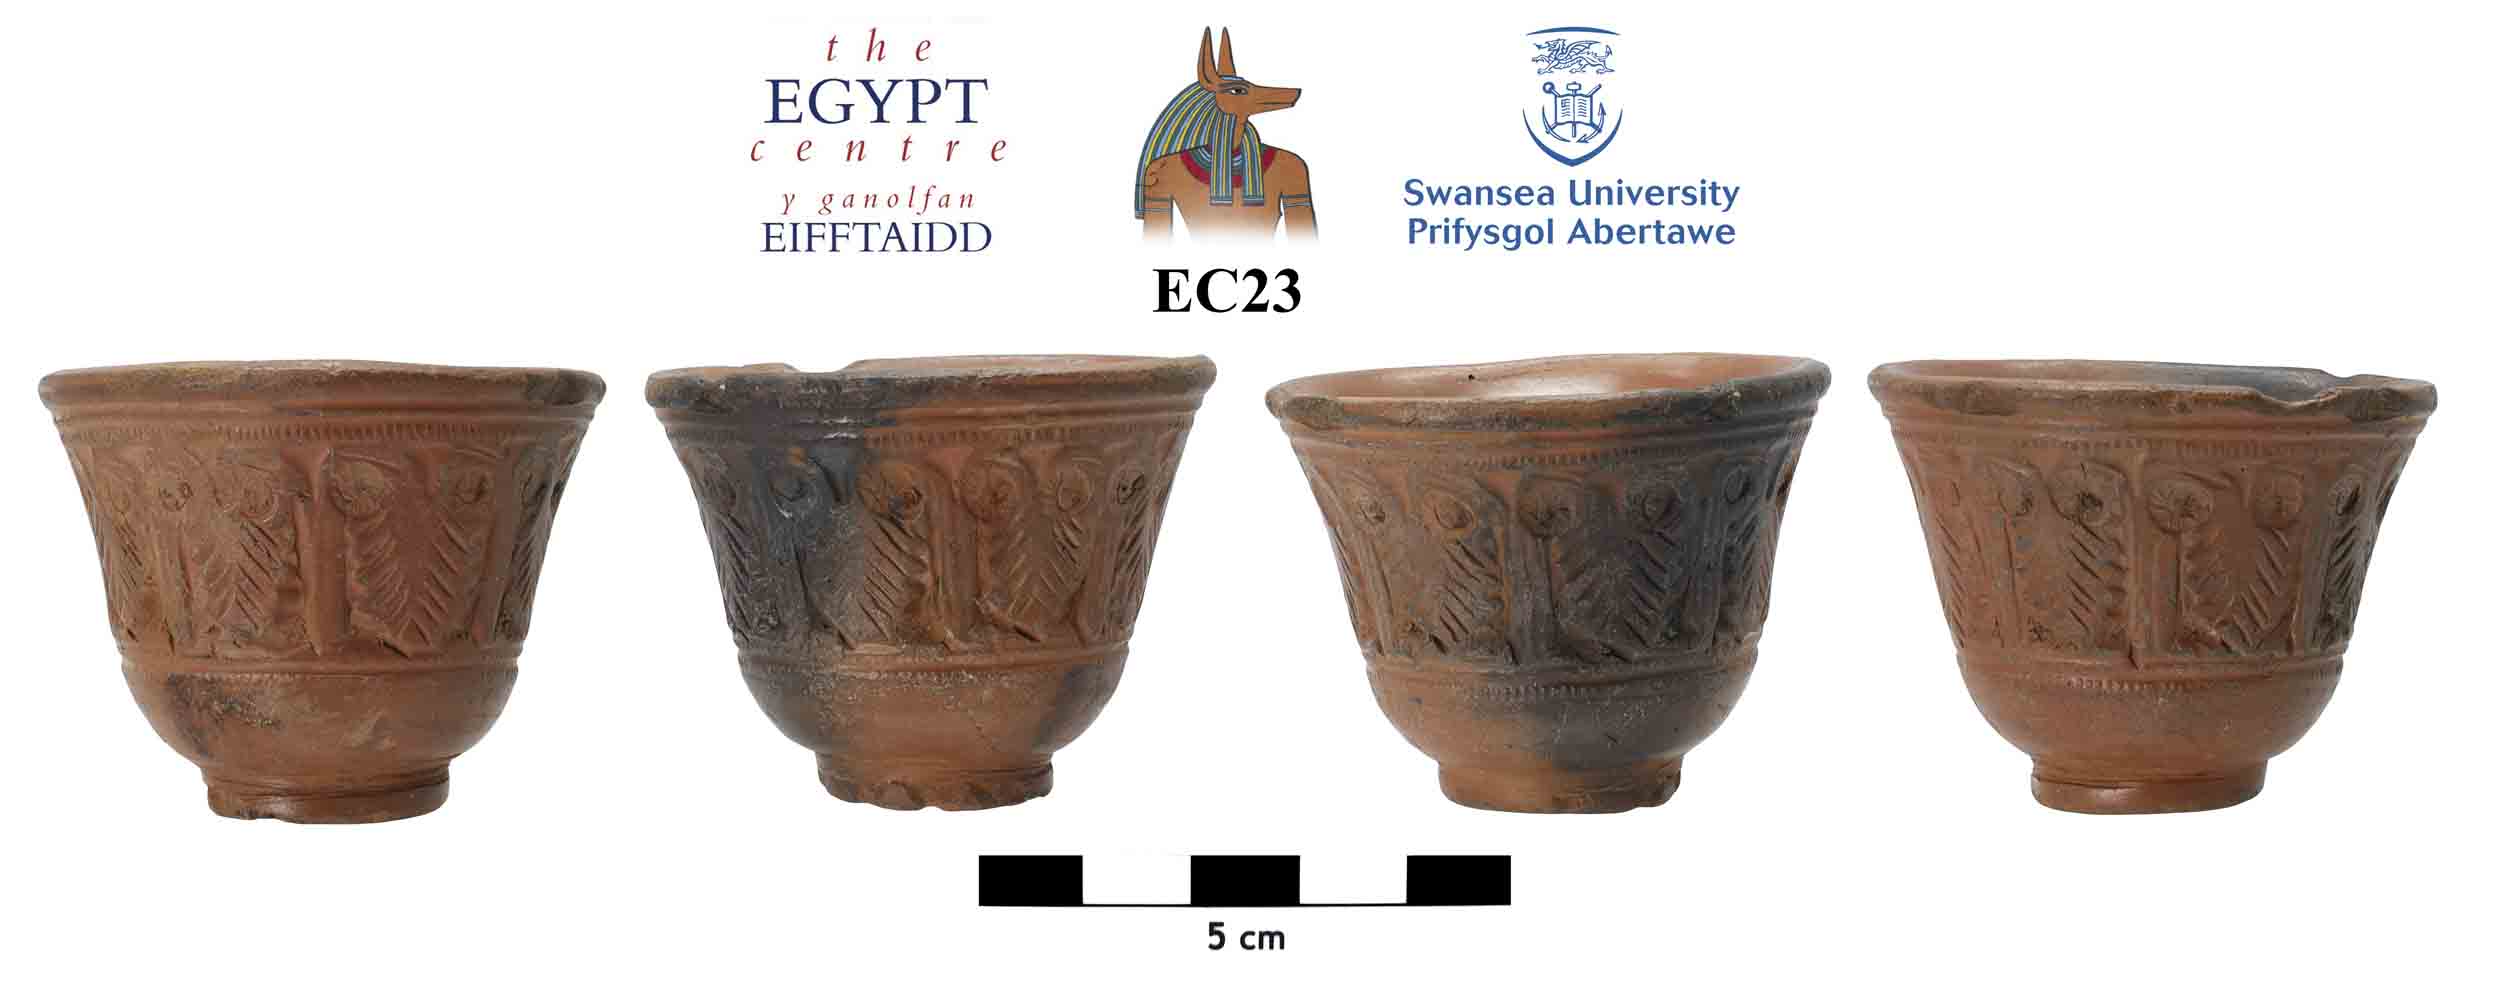 Image for: Small goblet-shaped bowl